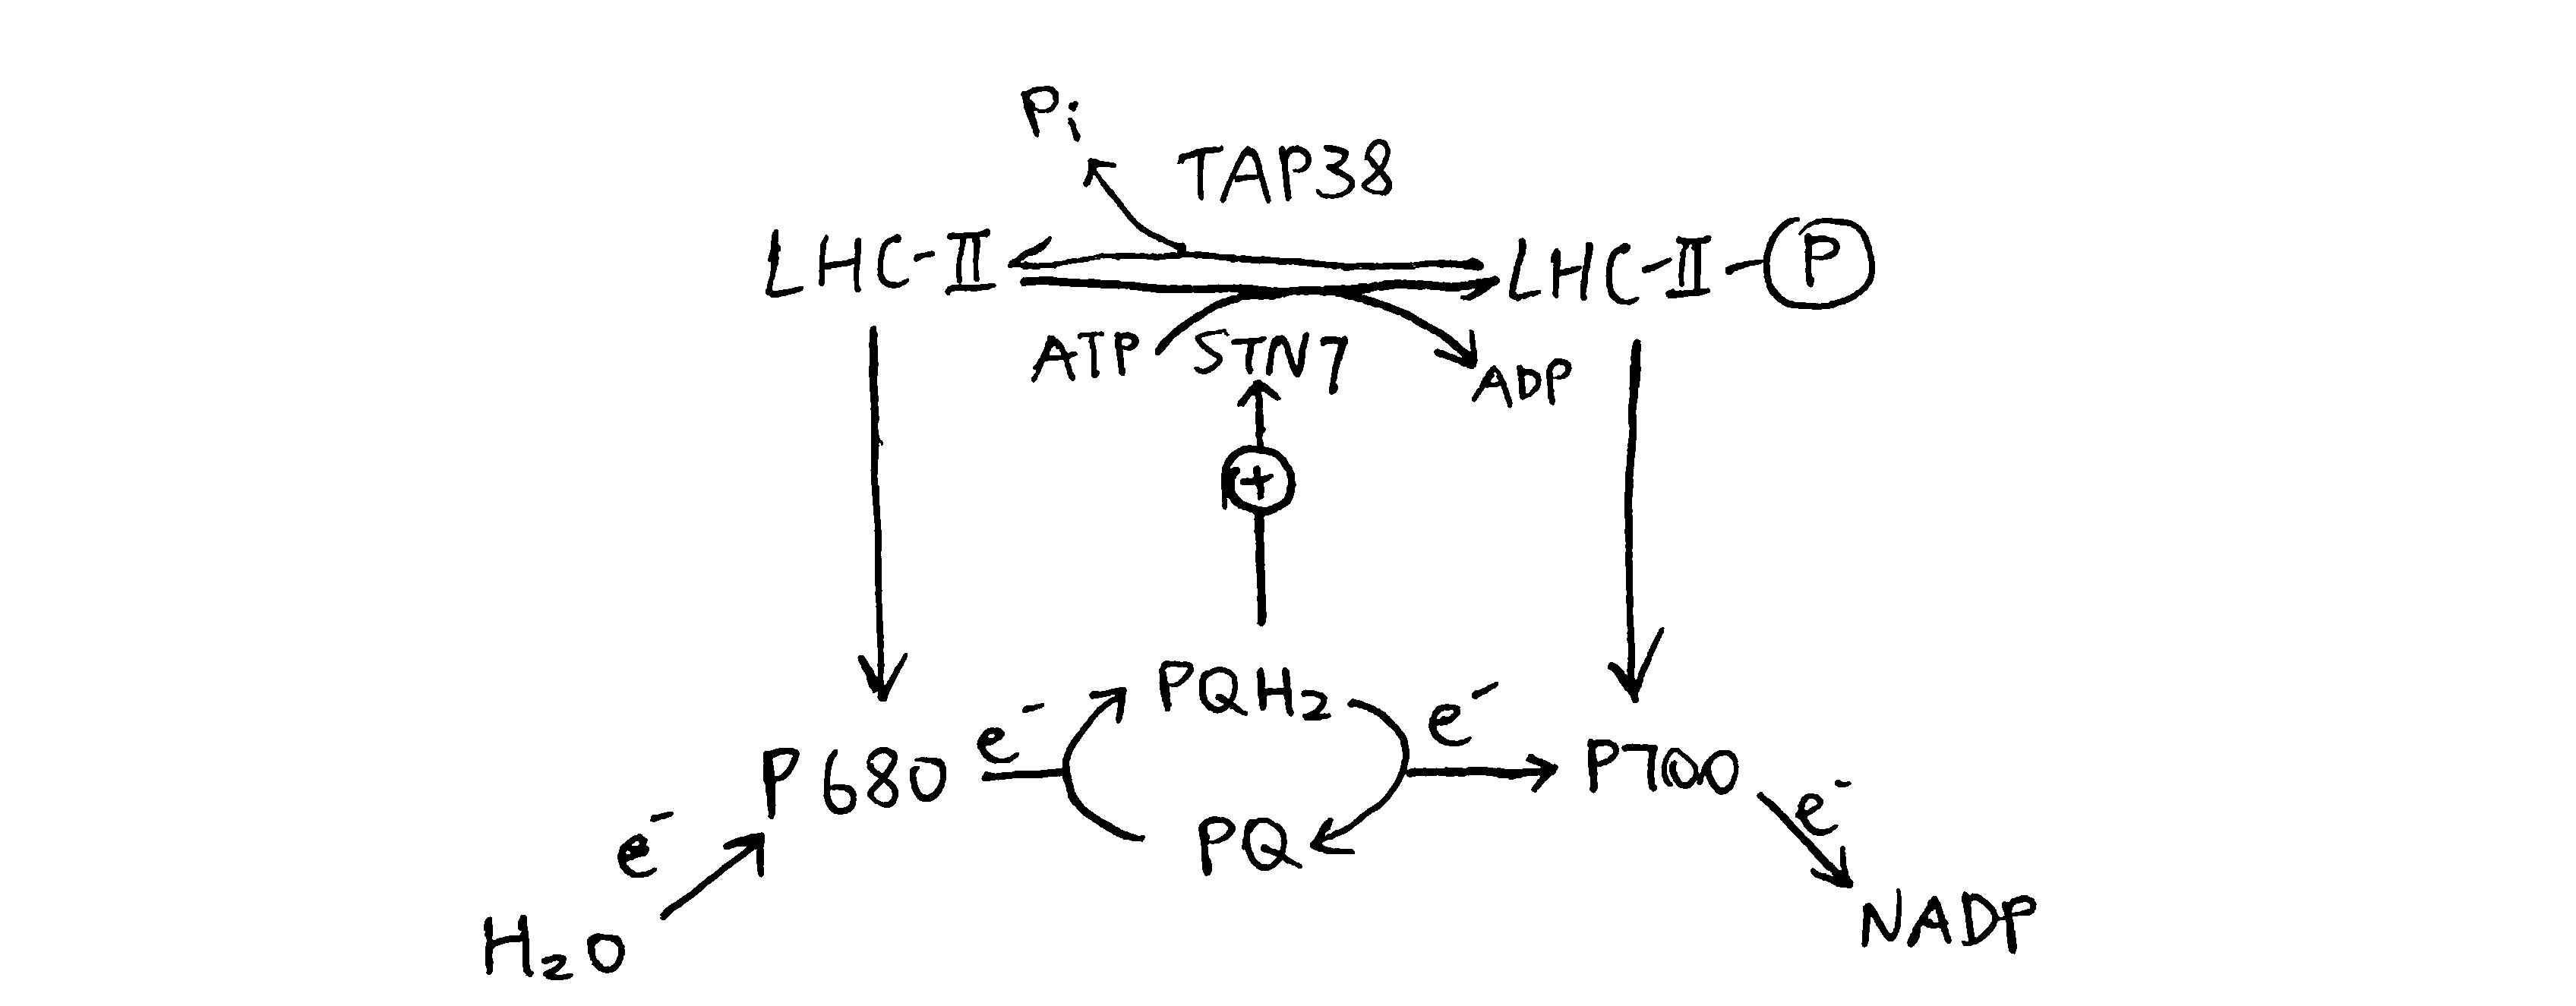 Oxidative status of plastoquinone determines the phosphorylation state of LHC-II, which in turn regulates relative activity of PS-I and PS-II.